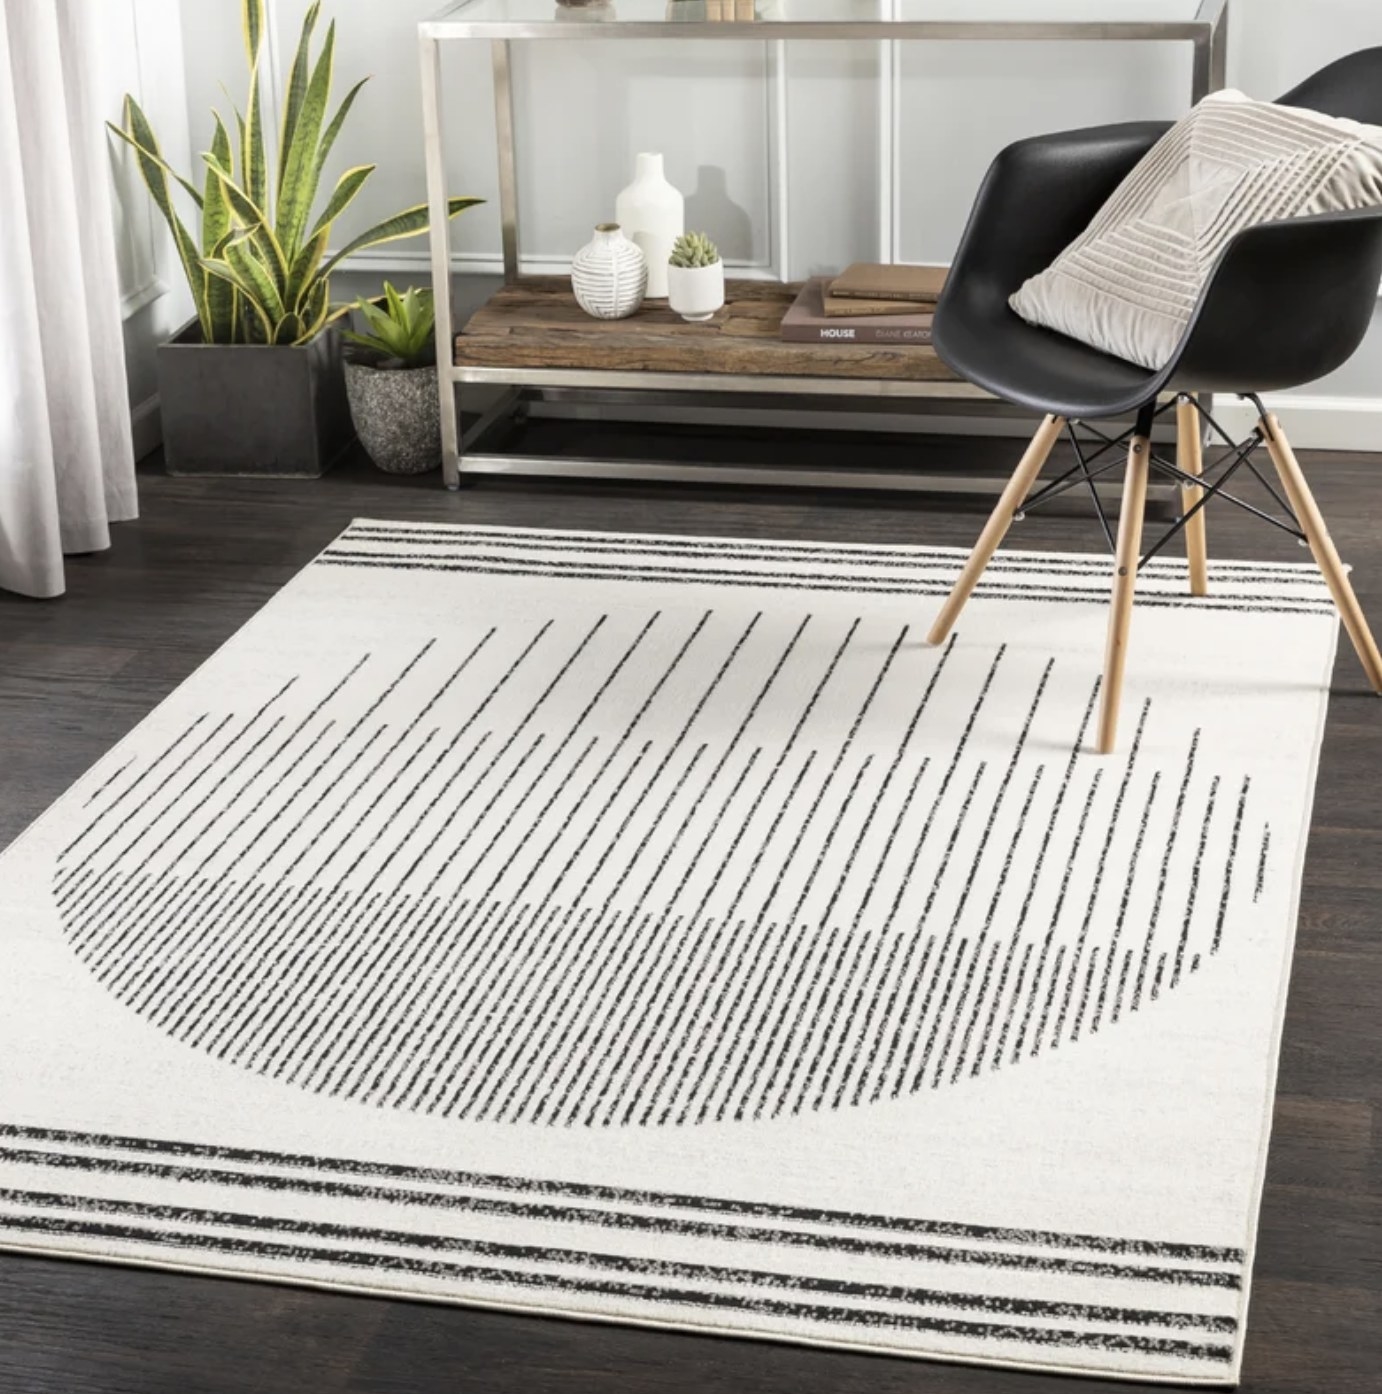 An abstract black and ivory area rug